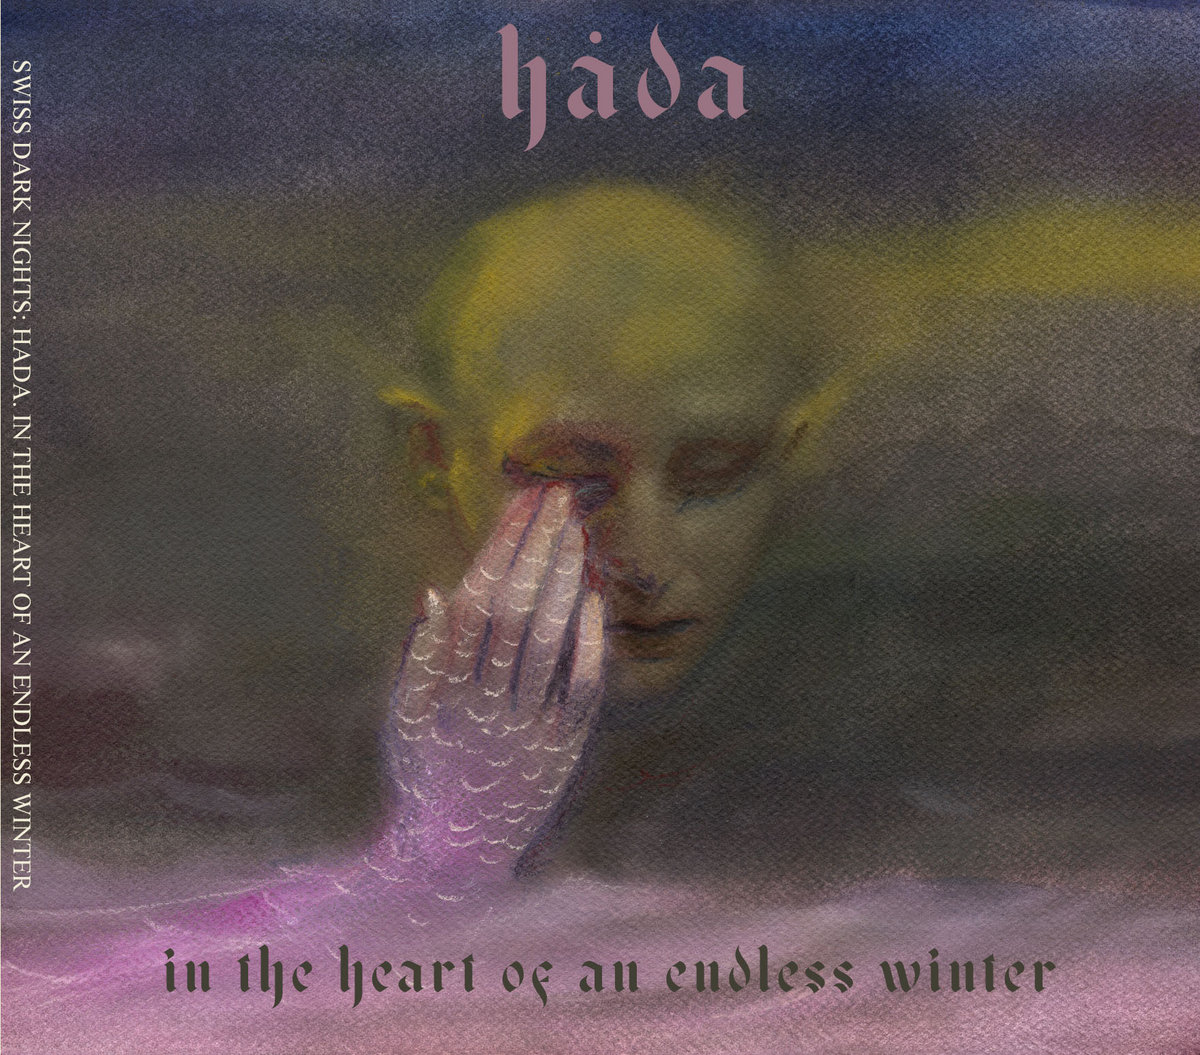 Hada, “In The Heart Of An Endless Winter”